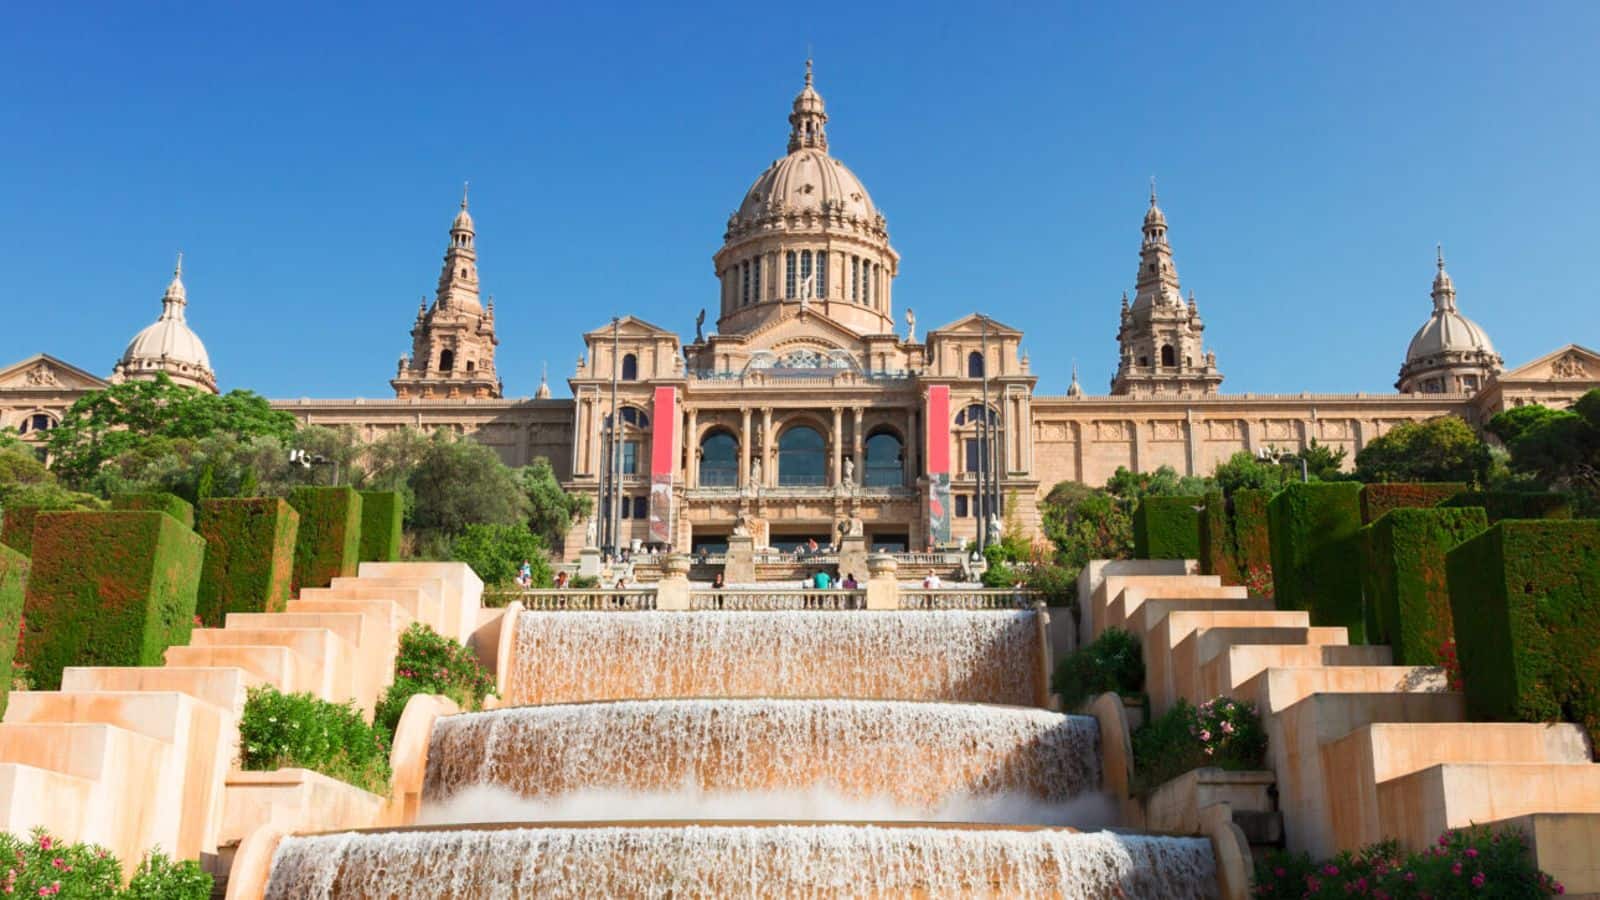 Head over to Barcelona's artistic weekend escapes